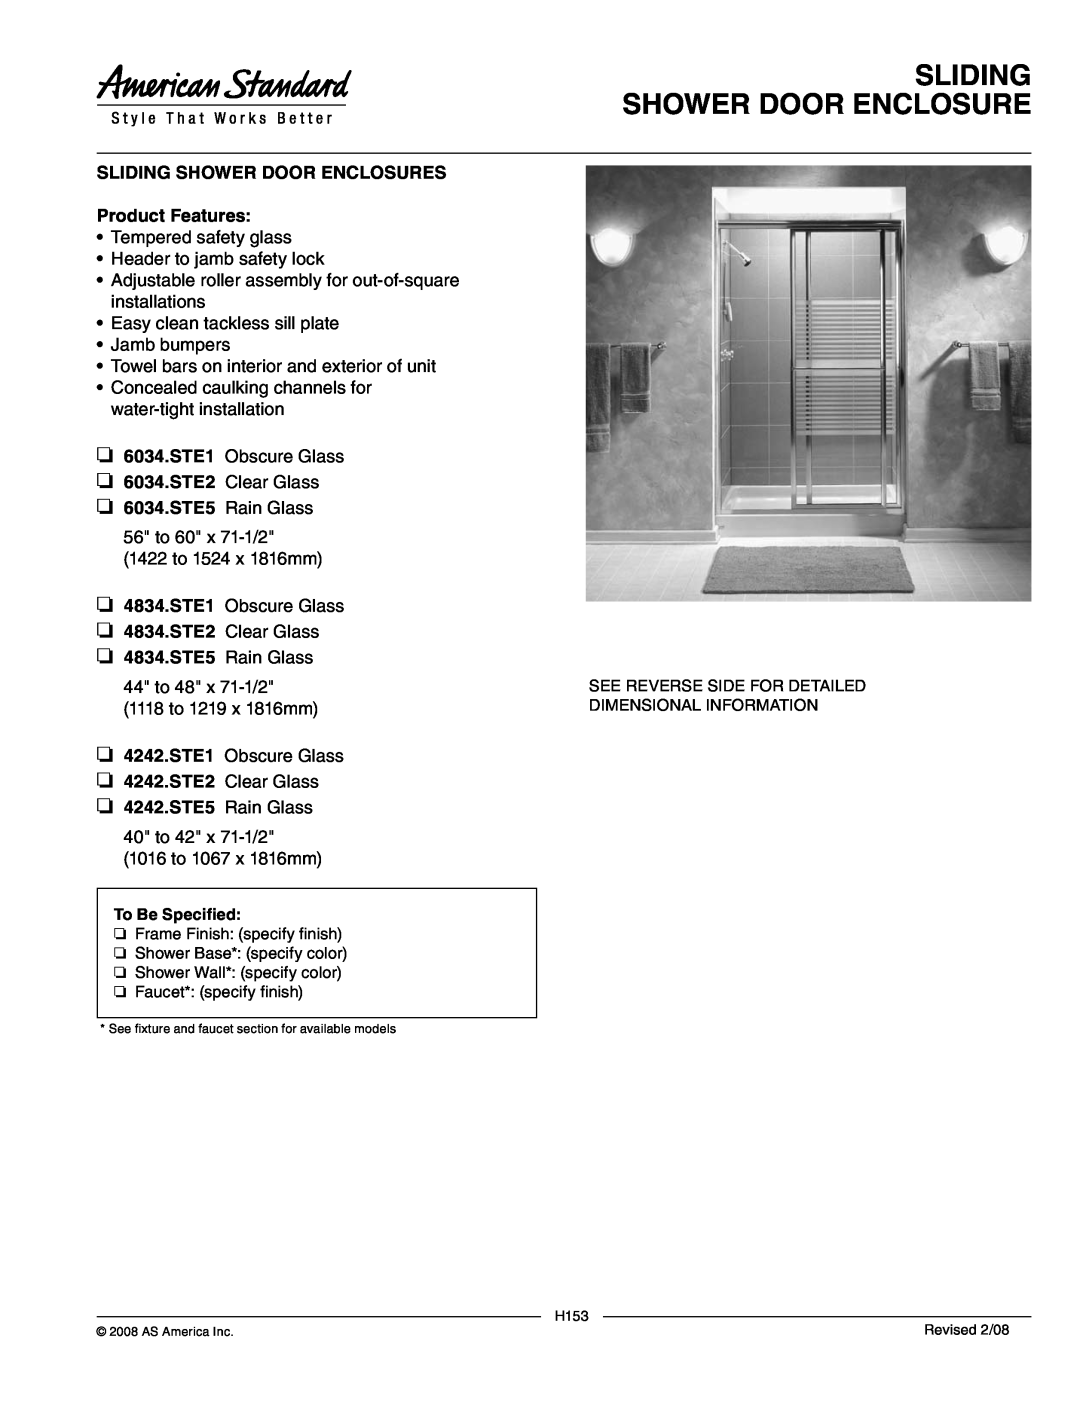 American Standard 6034.STE2 manual Sliding Shower Door Enclosure, SLIDING SHOWER DOOR ENCLOSURES Product Features 